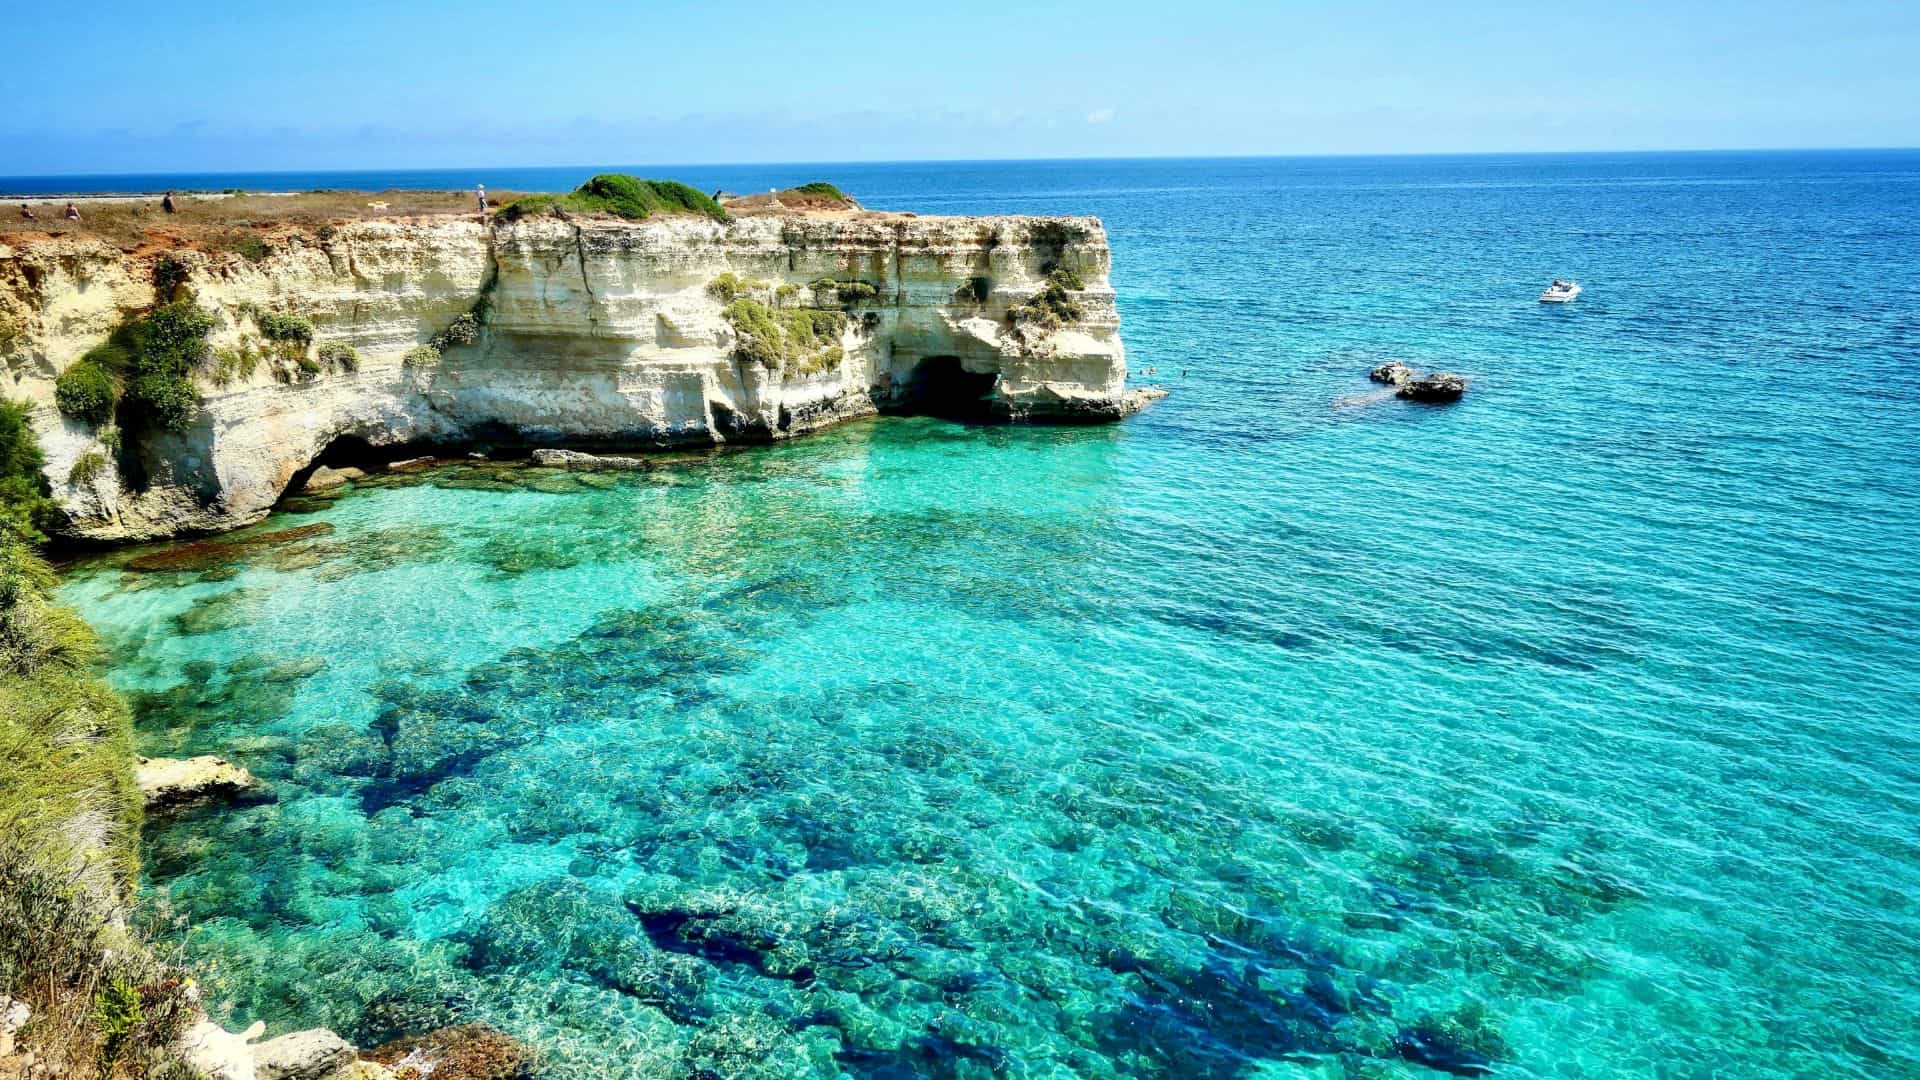 View of a rocky beach in Salento